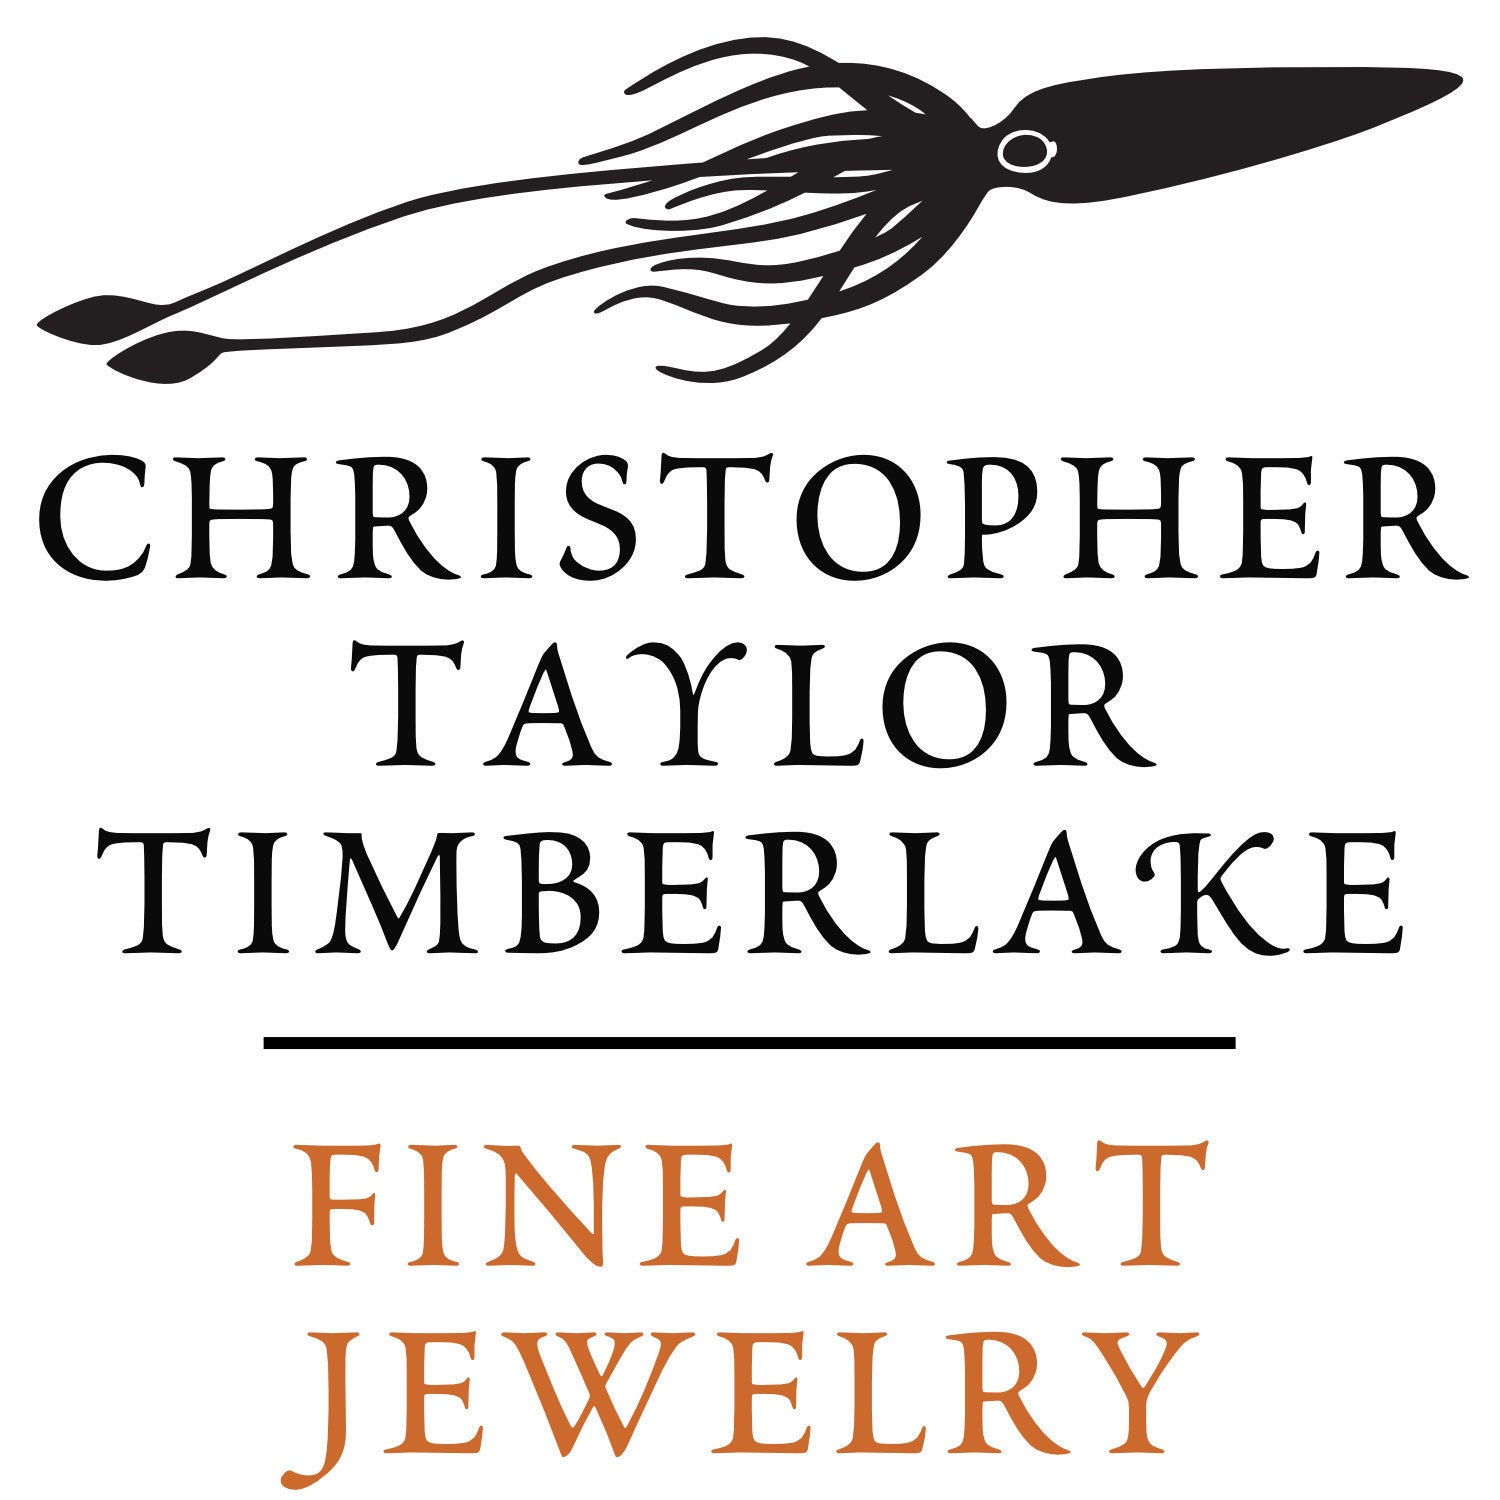 Stainless Steel Ring with Blue Jade Inlay - Christopher Taylor Timberlake  Fine Art Jewelry